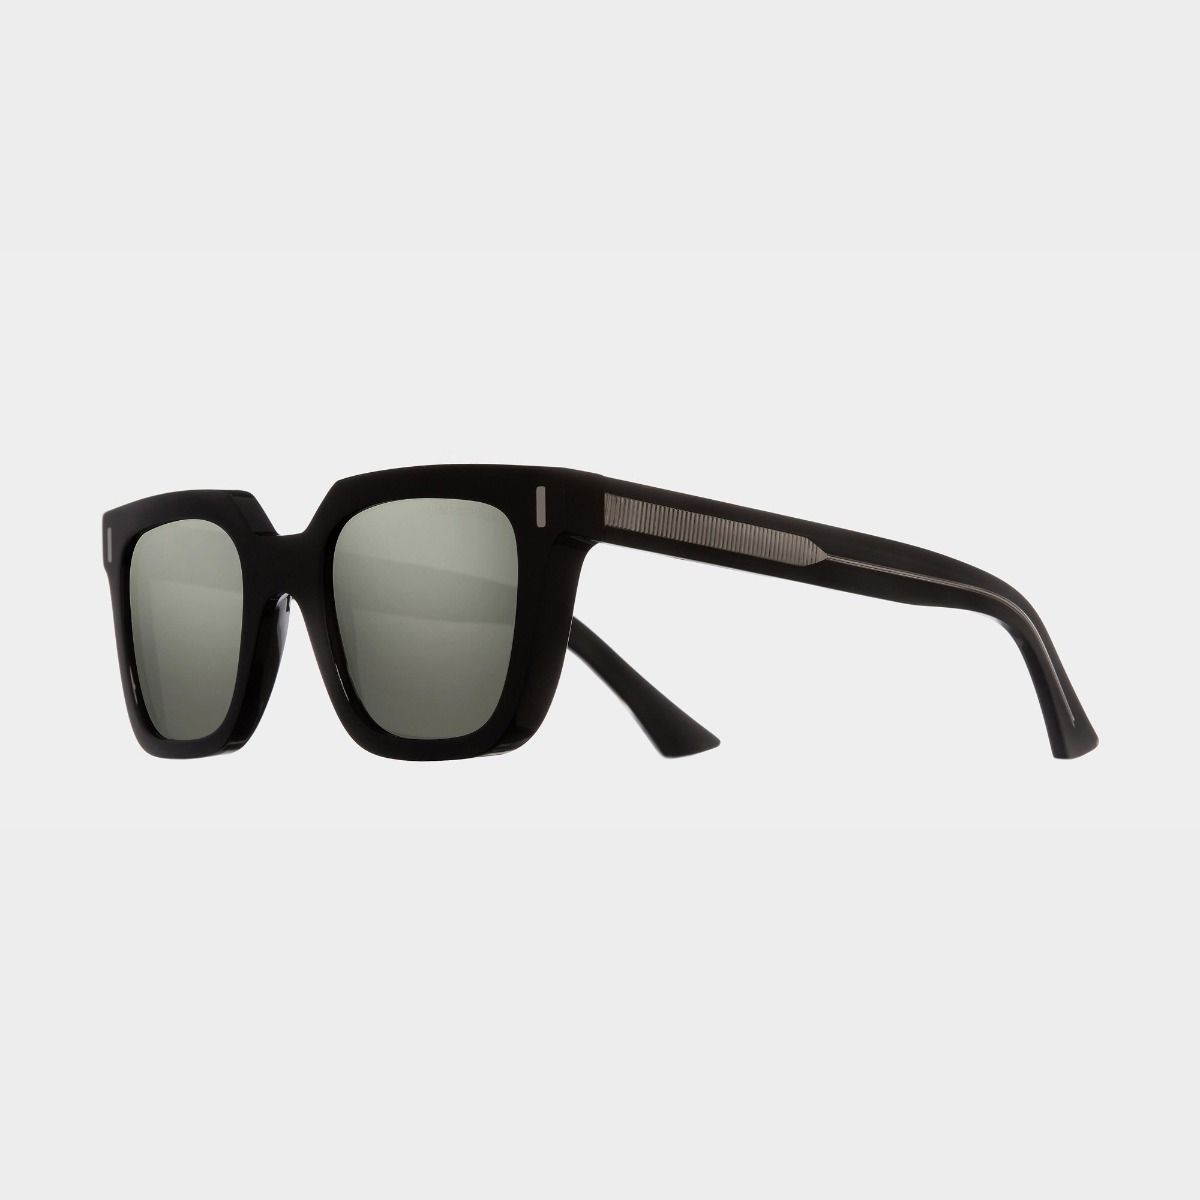 Cutler and Gross, 1305 Square Sunglasses - Black